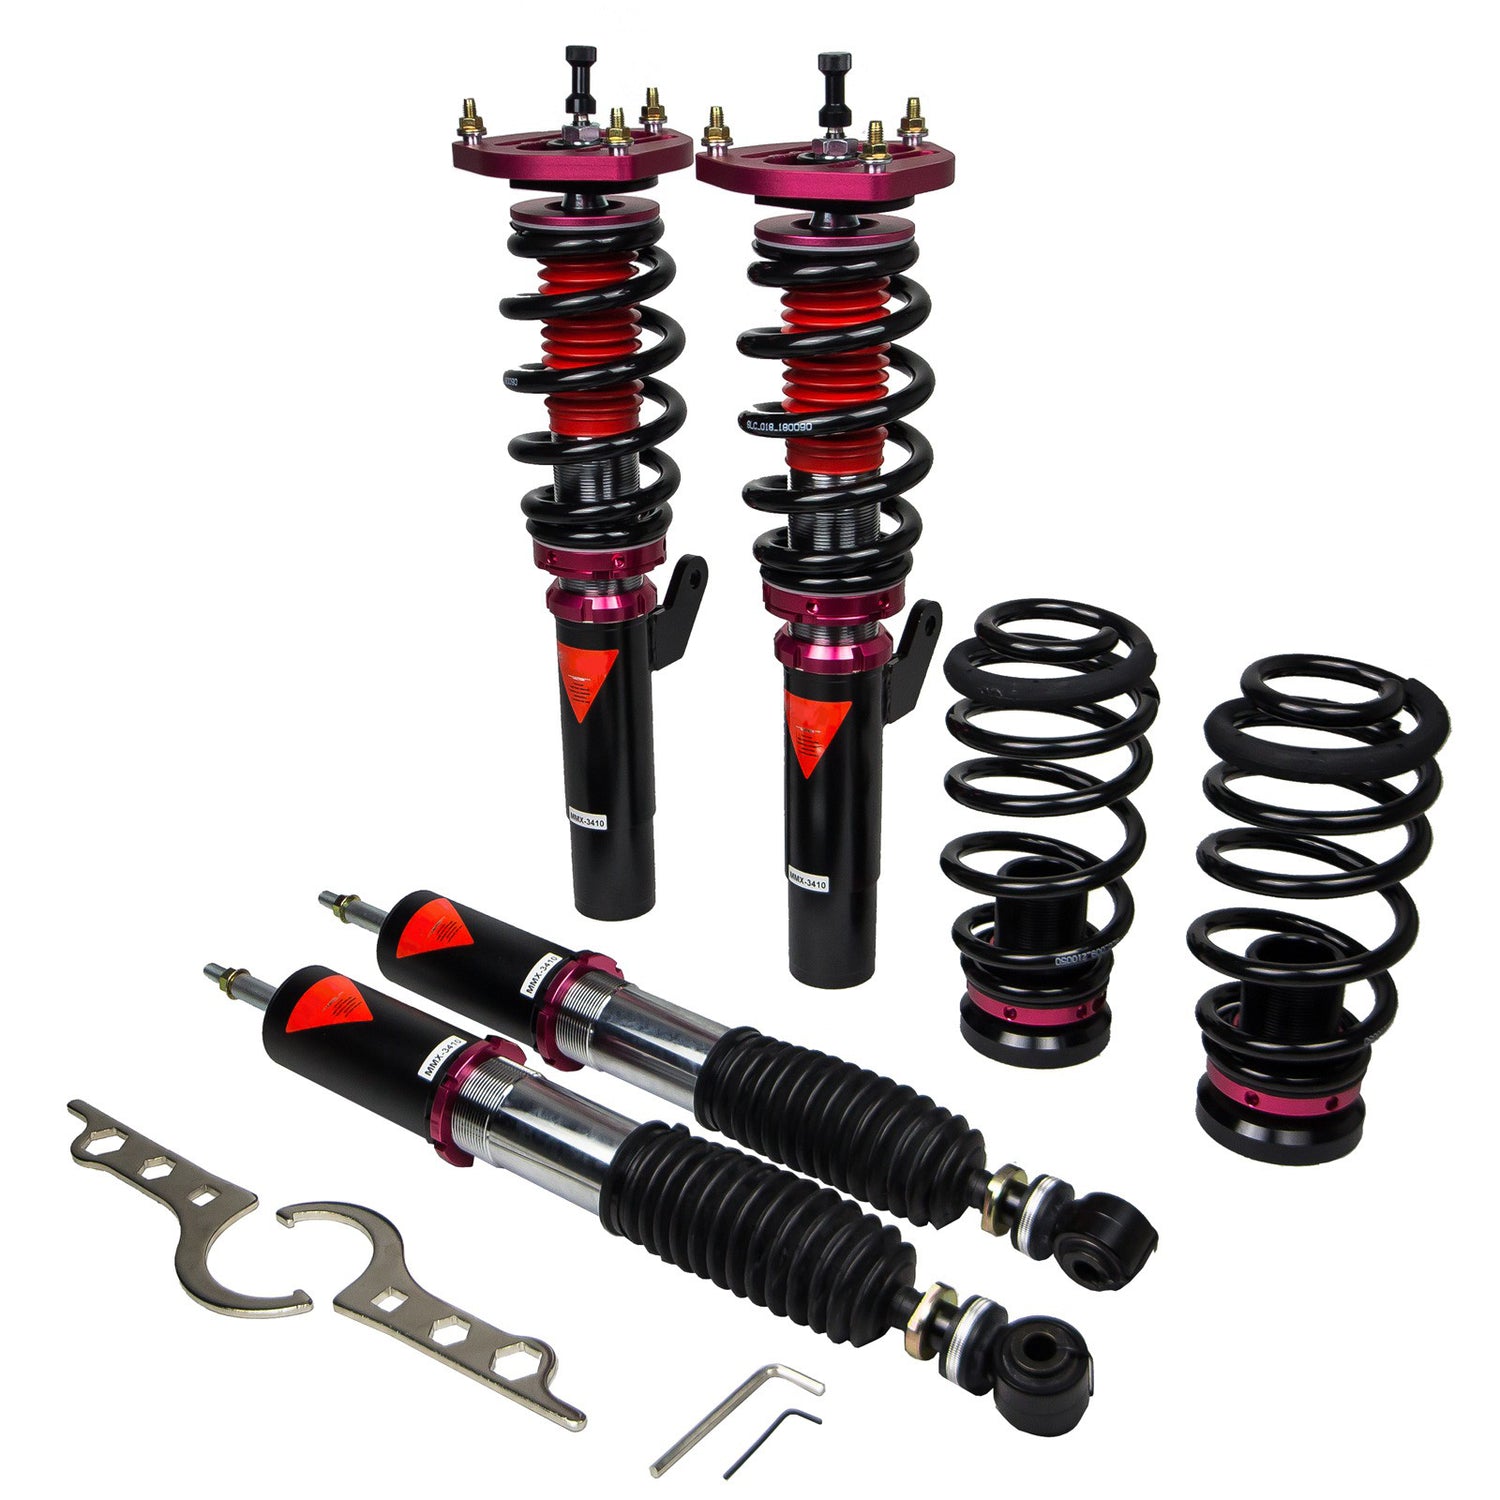 MMX3430-A MAXX Coilovers Lowering Kit, Fully Adjustable, Ride Height, 40 Clicks Rebound Settings, Volkswagen Golf(MK7) 2015+UP